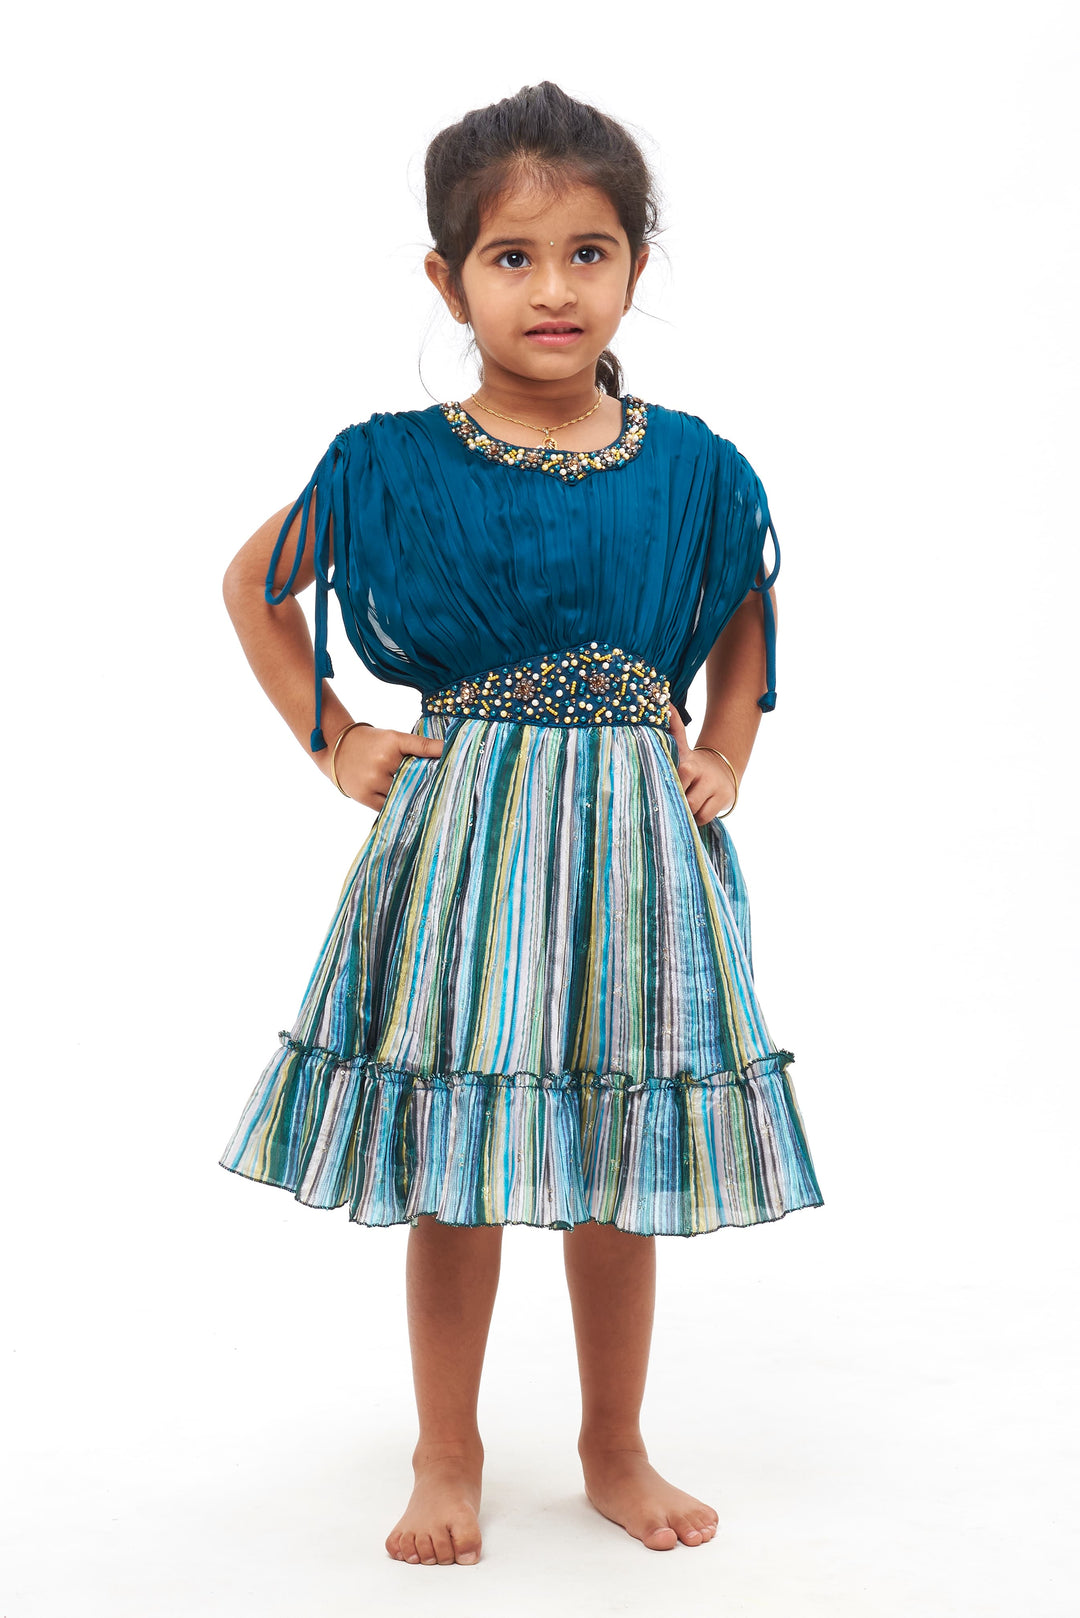 The Nesavu Girls Fancy Party Frock Pearl & Bead Embroidered with Multicolor Striped Patry Frock - Elegant Party Dress for Girls Nesavu 16 (1Y) / Blue / Poly Georgette PF162A-16 Pearl & Bead Embellished Party Frock | Elegant Party Dresses for Little Girls | The Nesavu